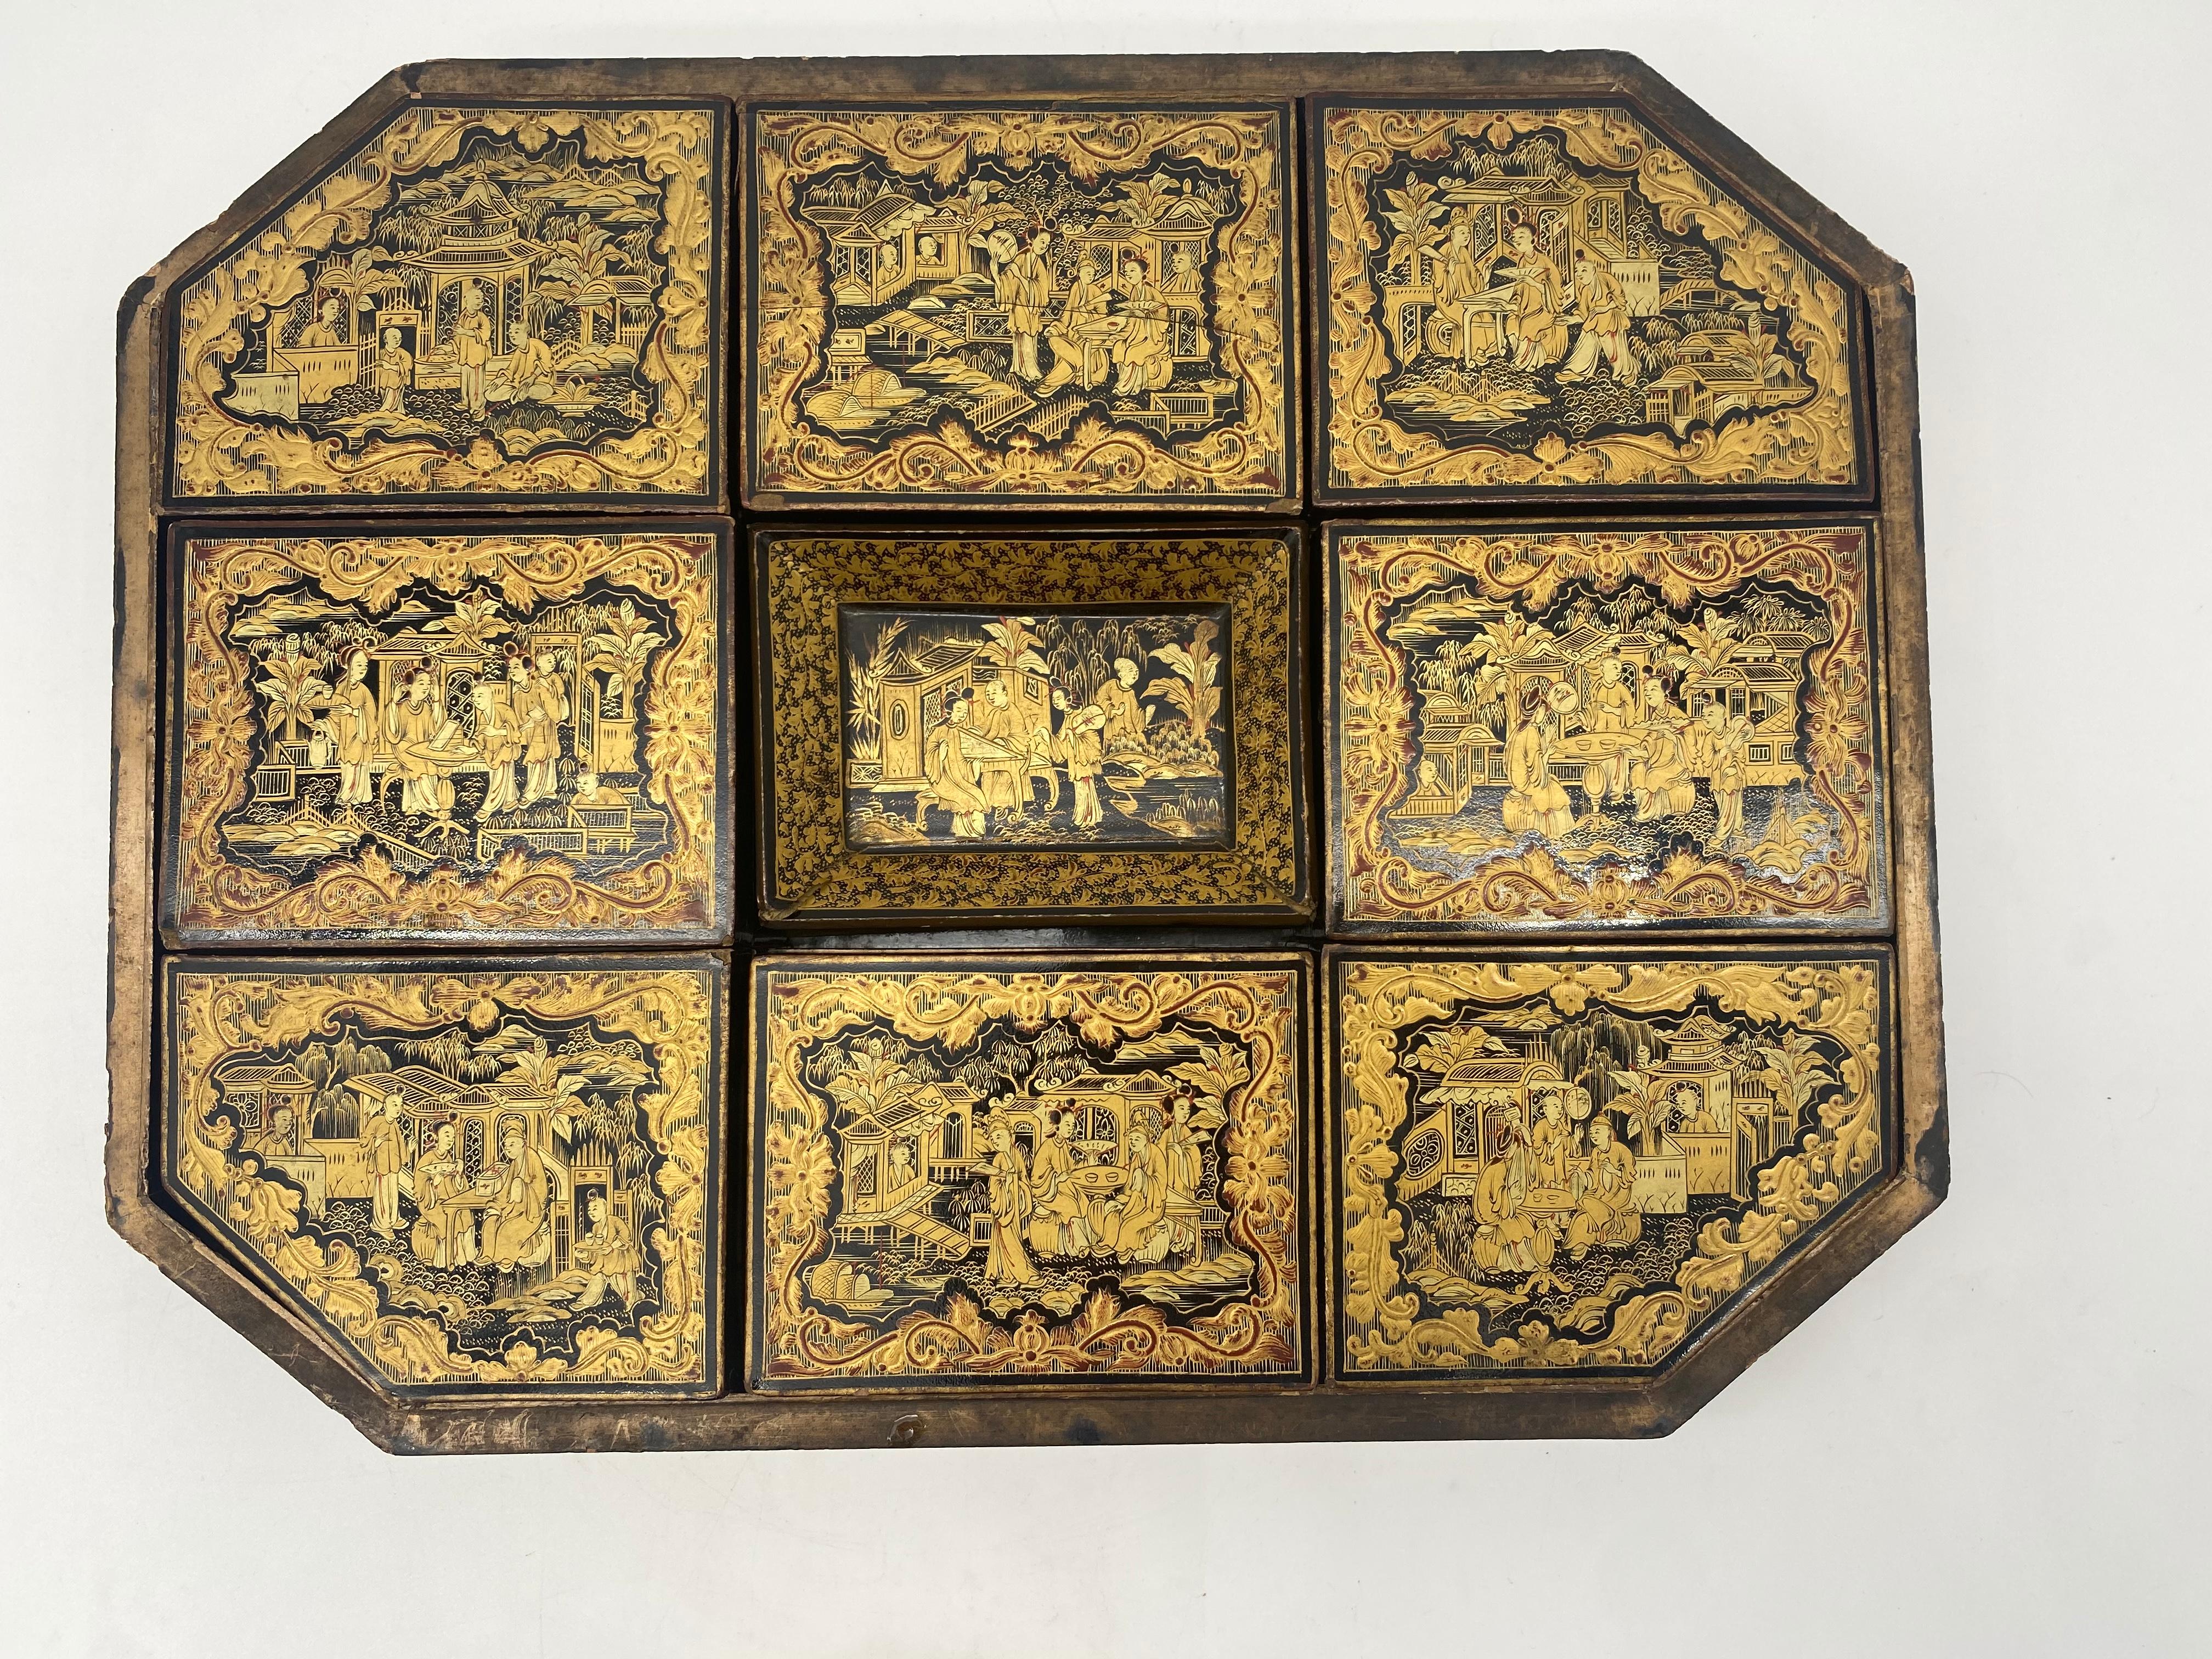 Antique 19th Century Export Chinese Gilt Chinoiserie Lacquer Gaming Box In Good Condition For Sale In Brea, CA